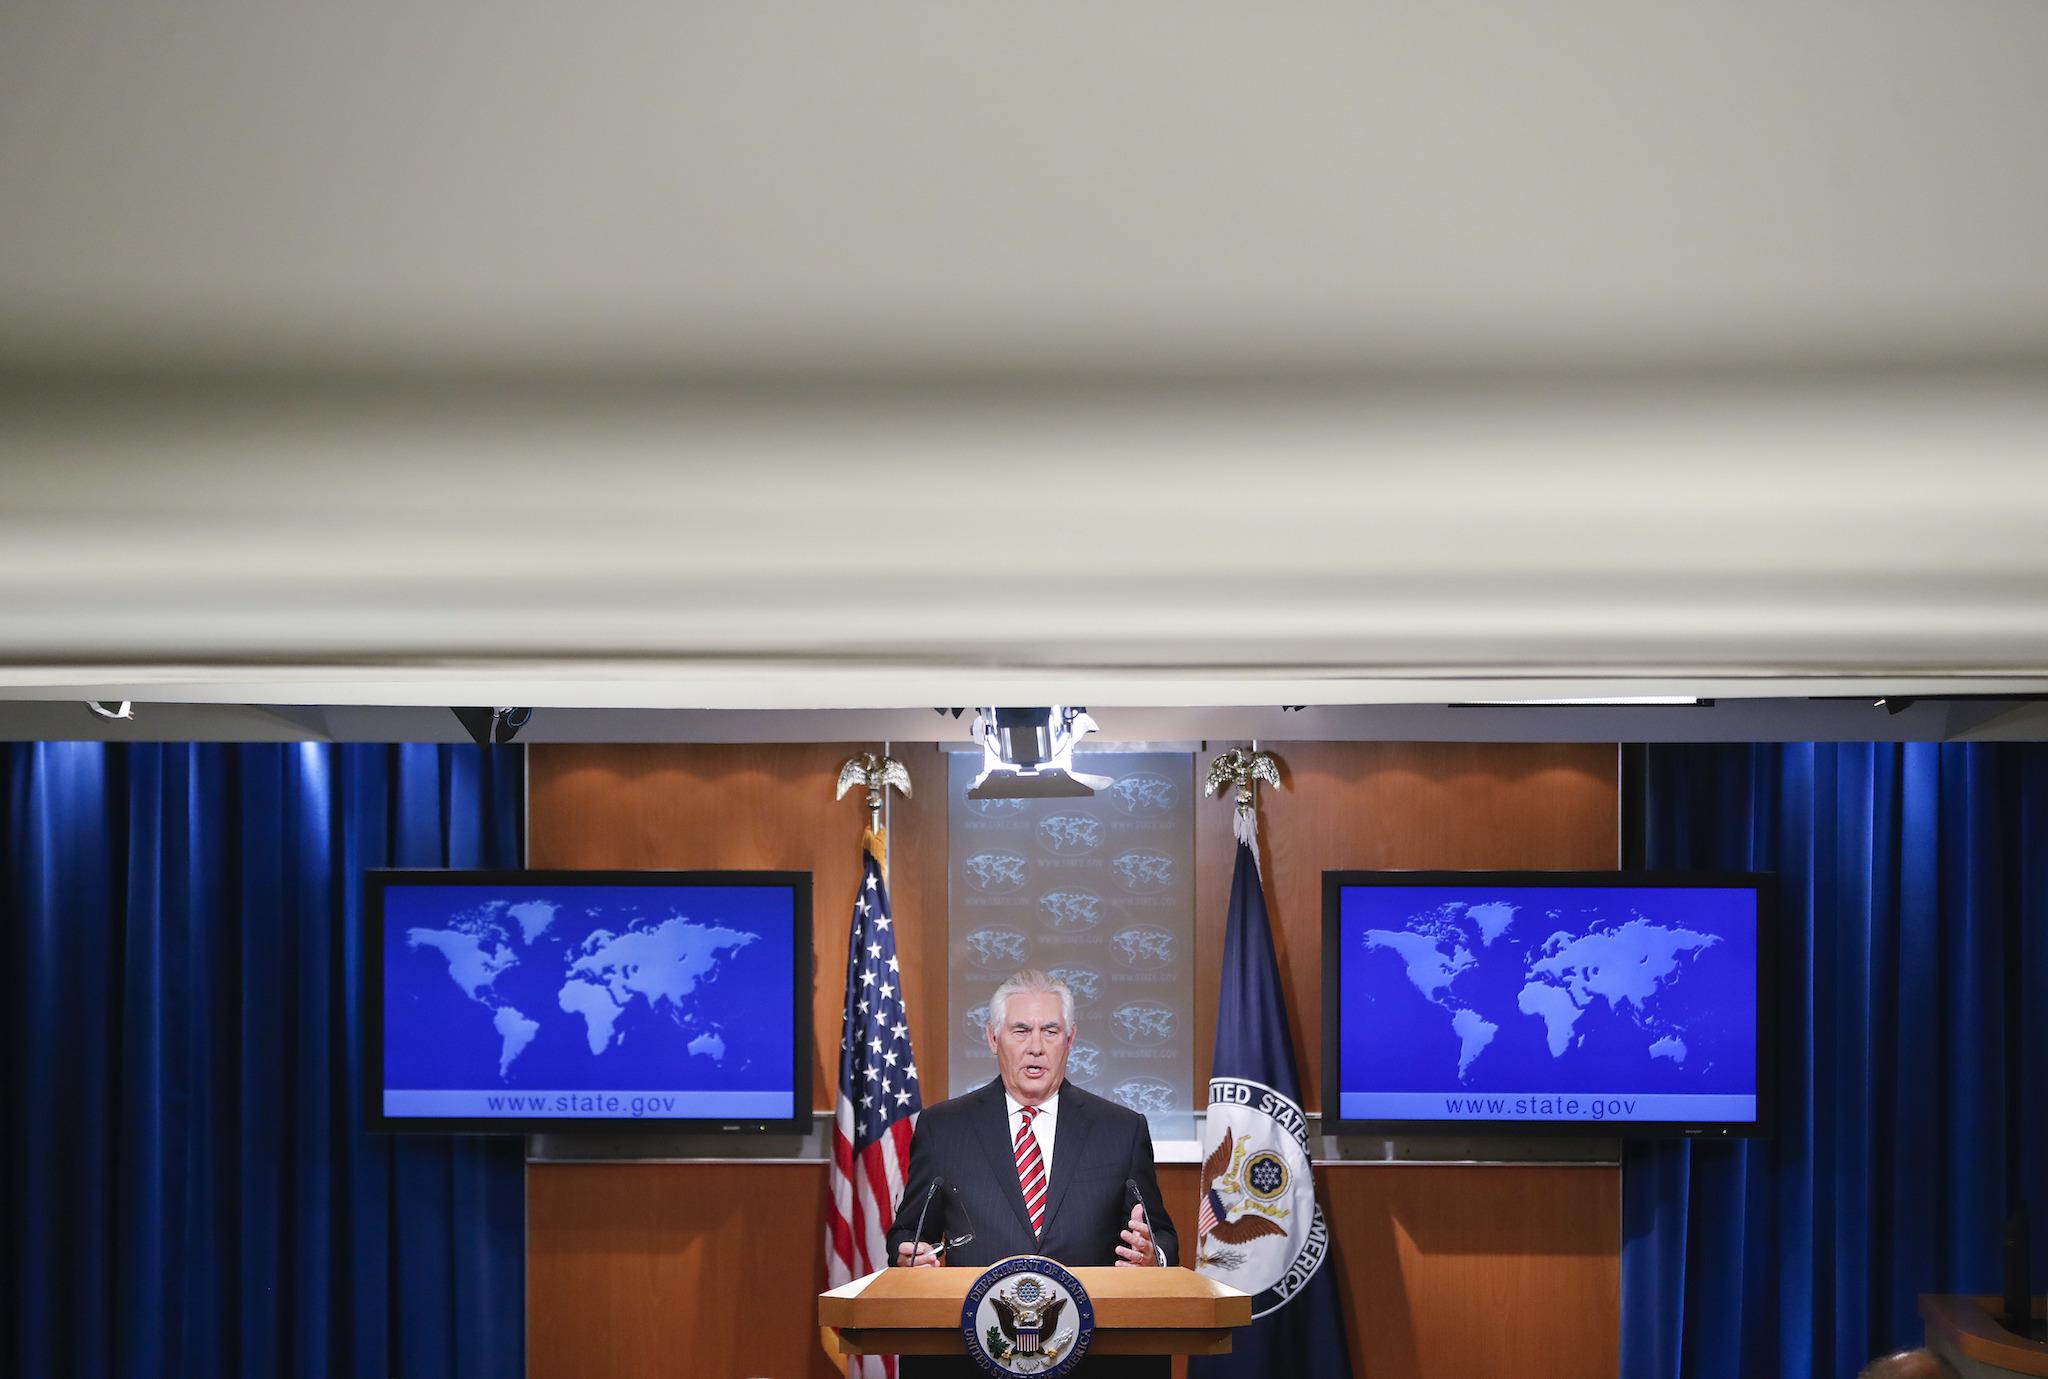 Secretary of State Rex Tillerson speaks at the State Department in Washington